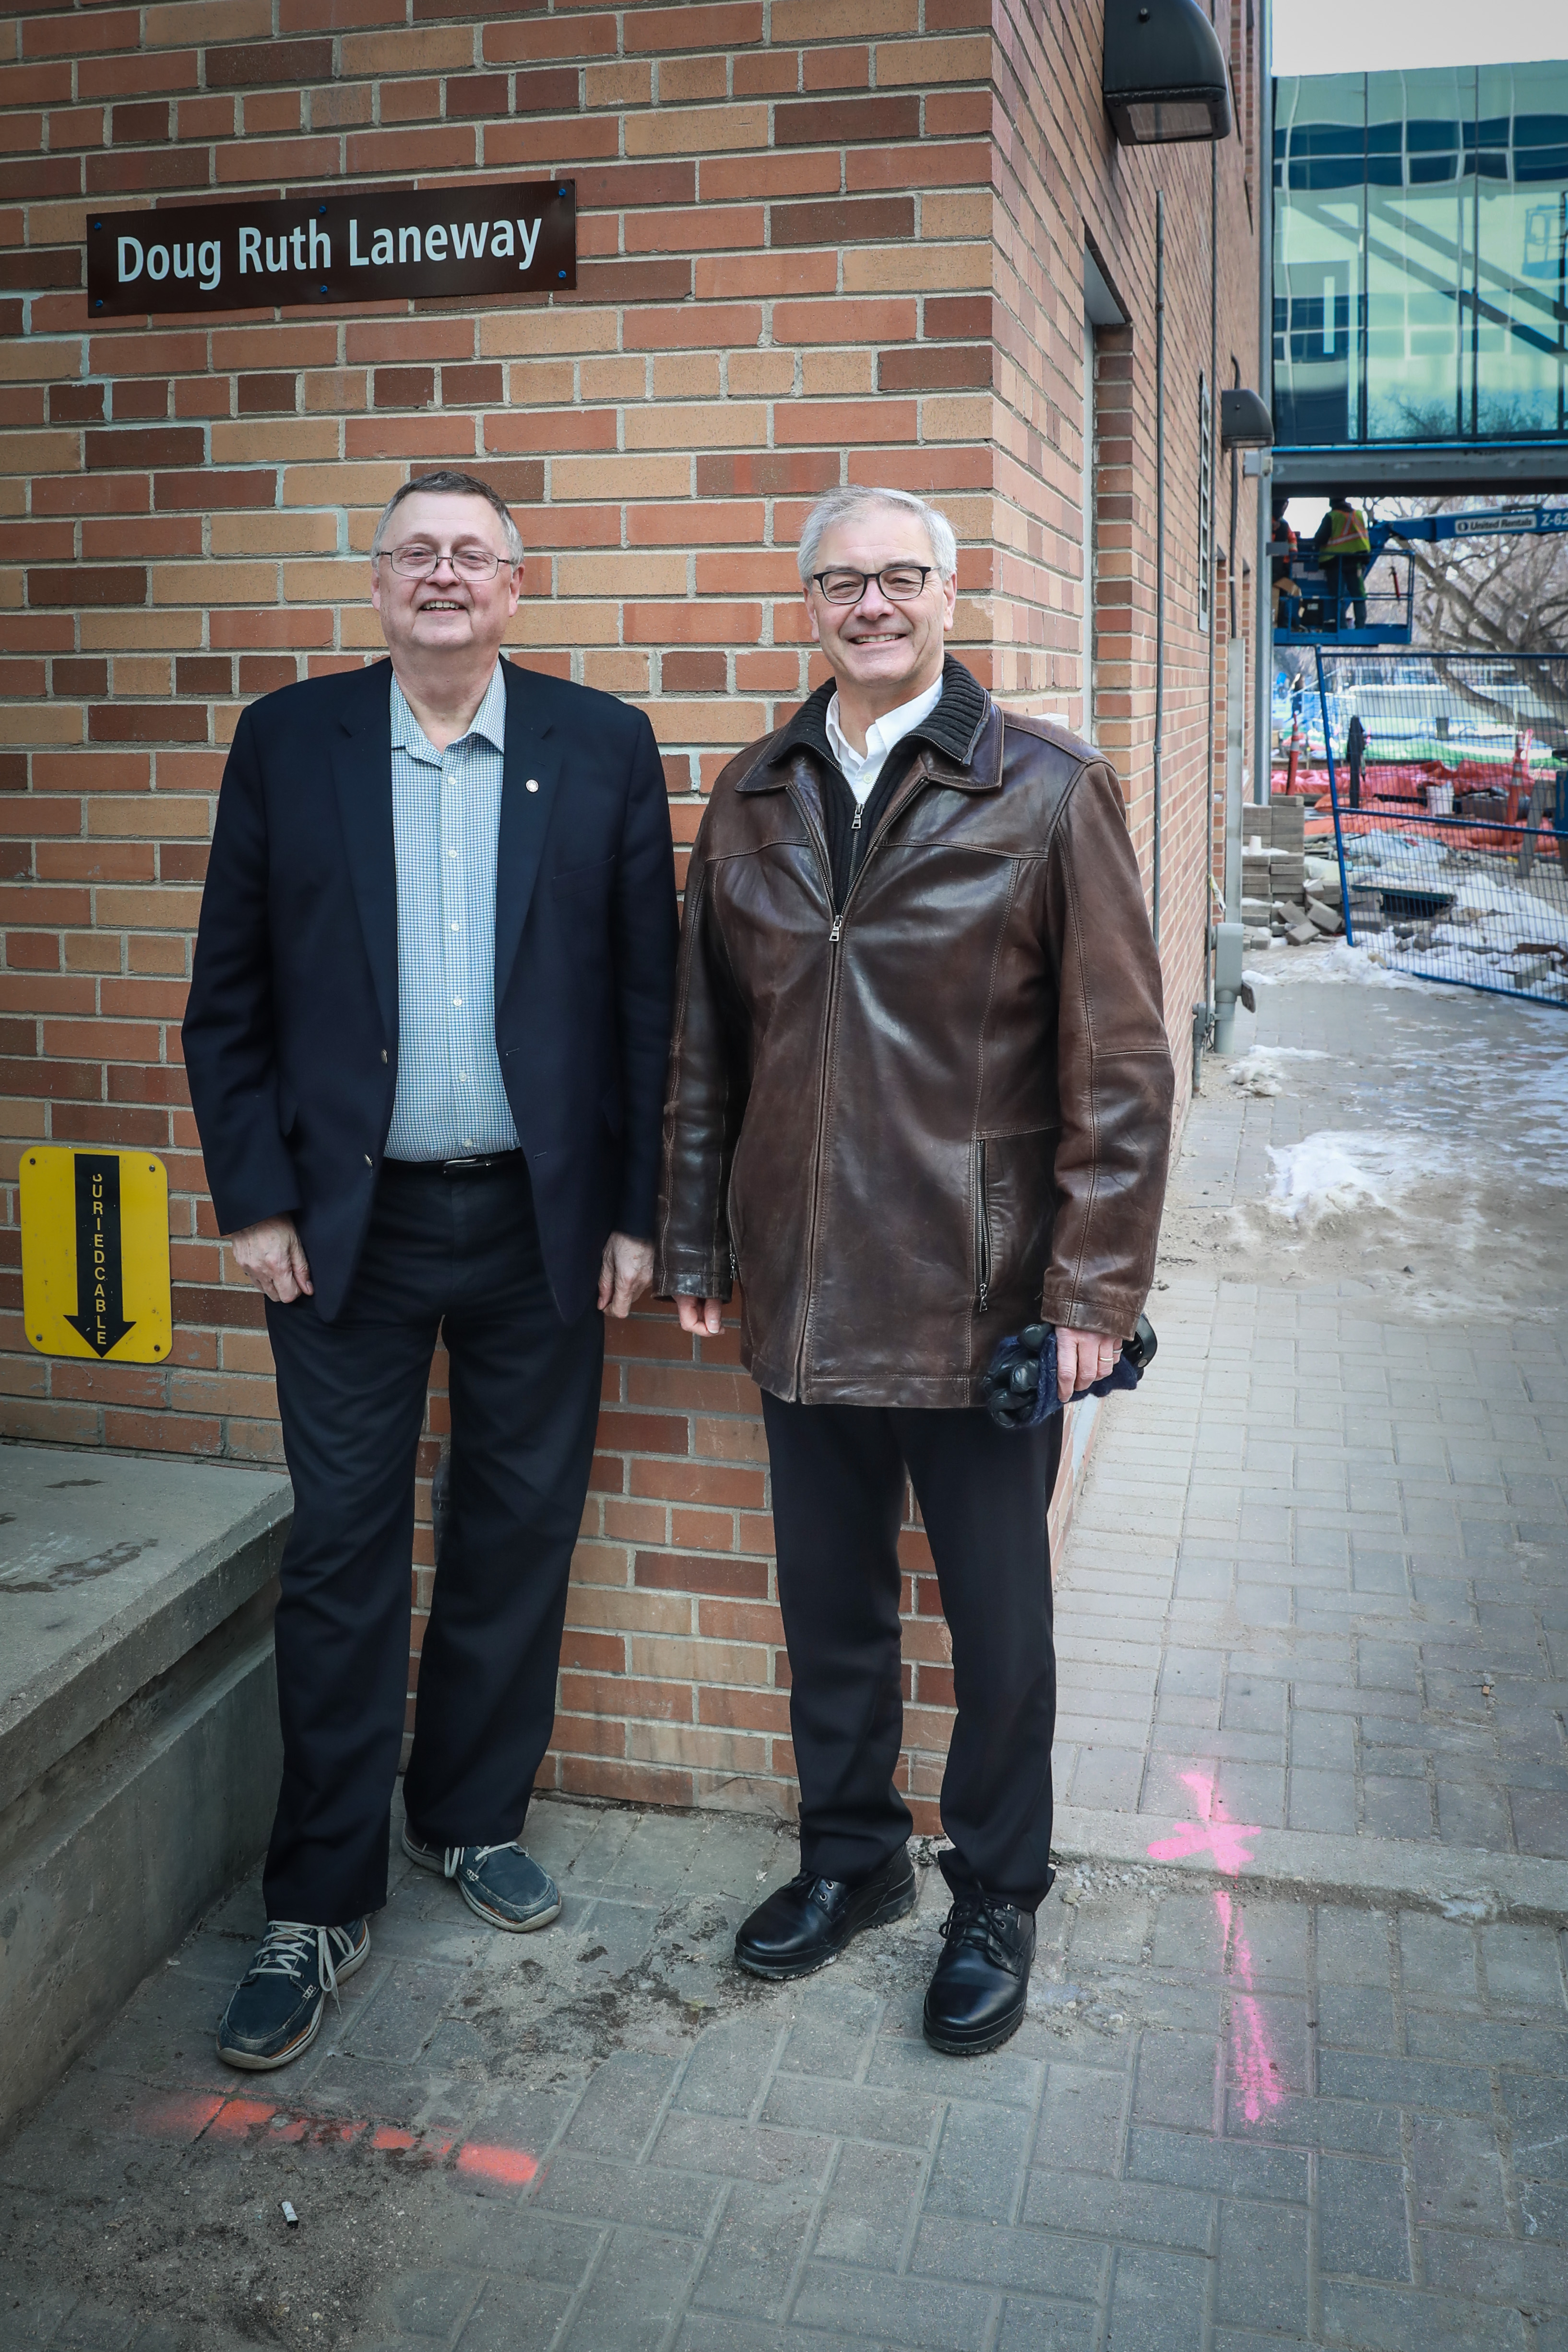 Alt: Doug Ruth with Jonathan Beddoes. Both are standing in front of sign reading "Doug Ruth Laneway", smiling and posing for the camera.